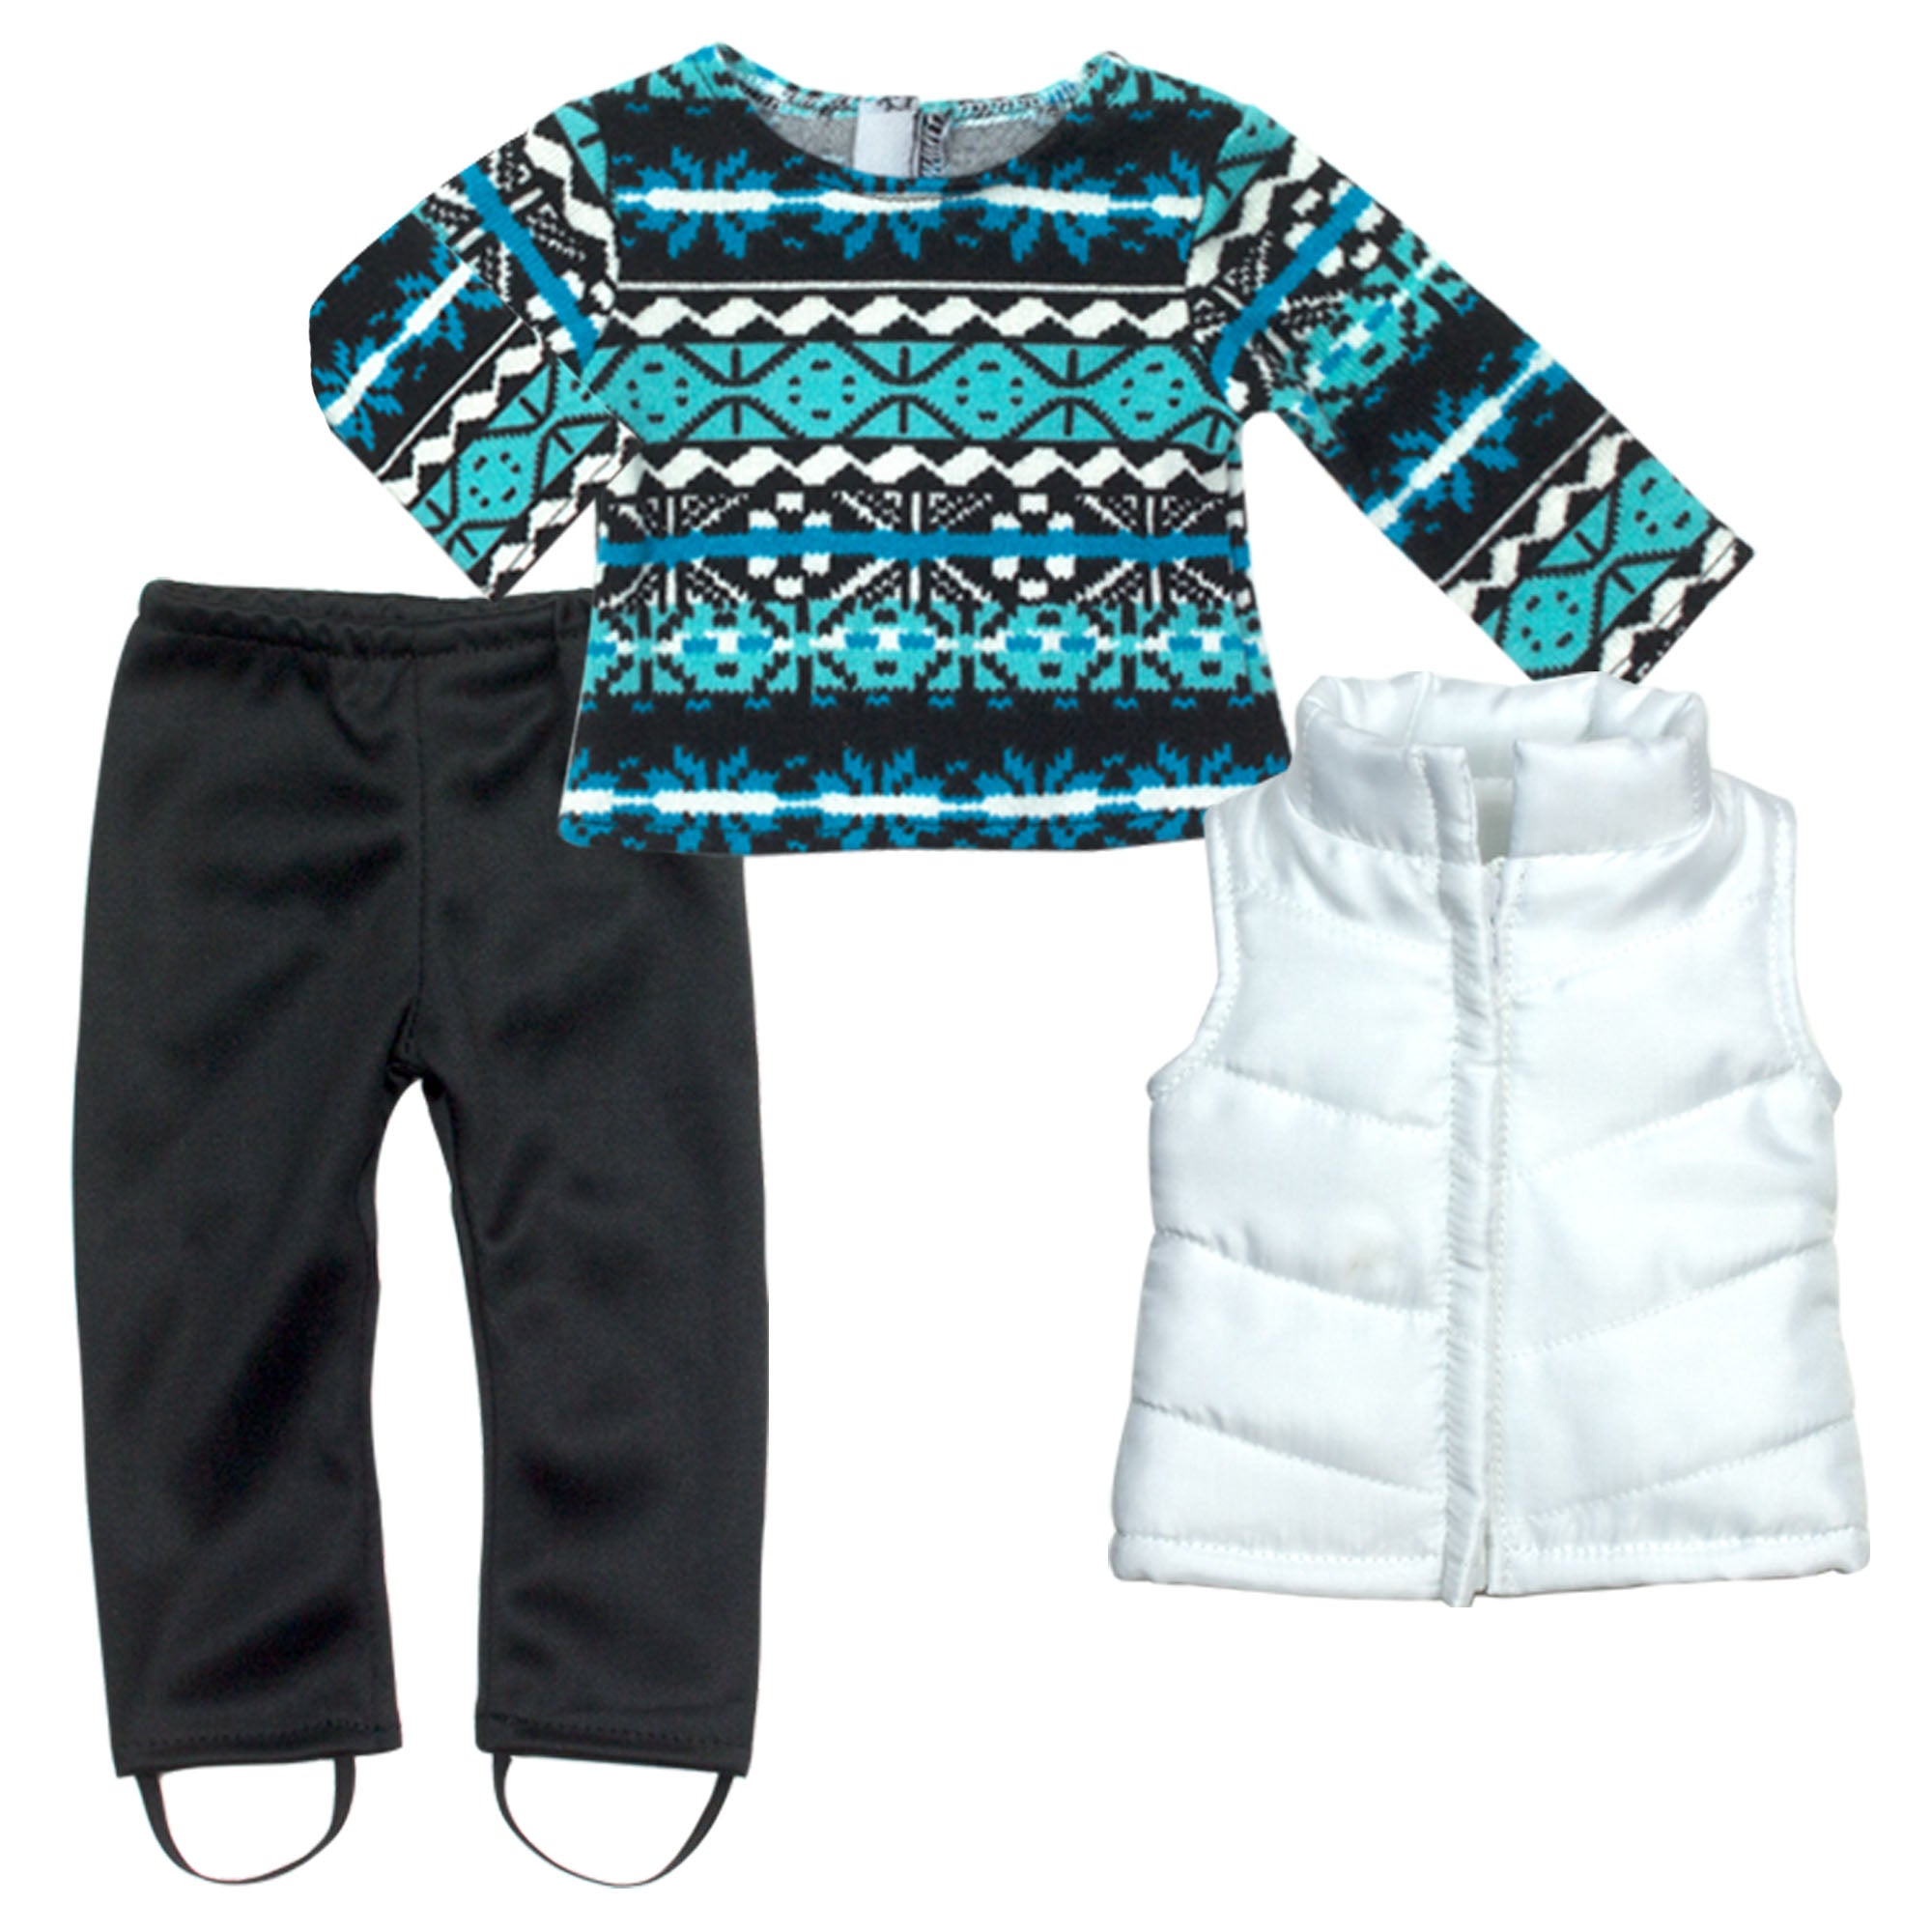 Sophia’s Complete Three-Piece Winter Boho Outfit with Ikat Print Sweater, Leggings, & Vest, Blue